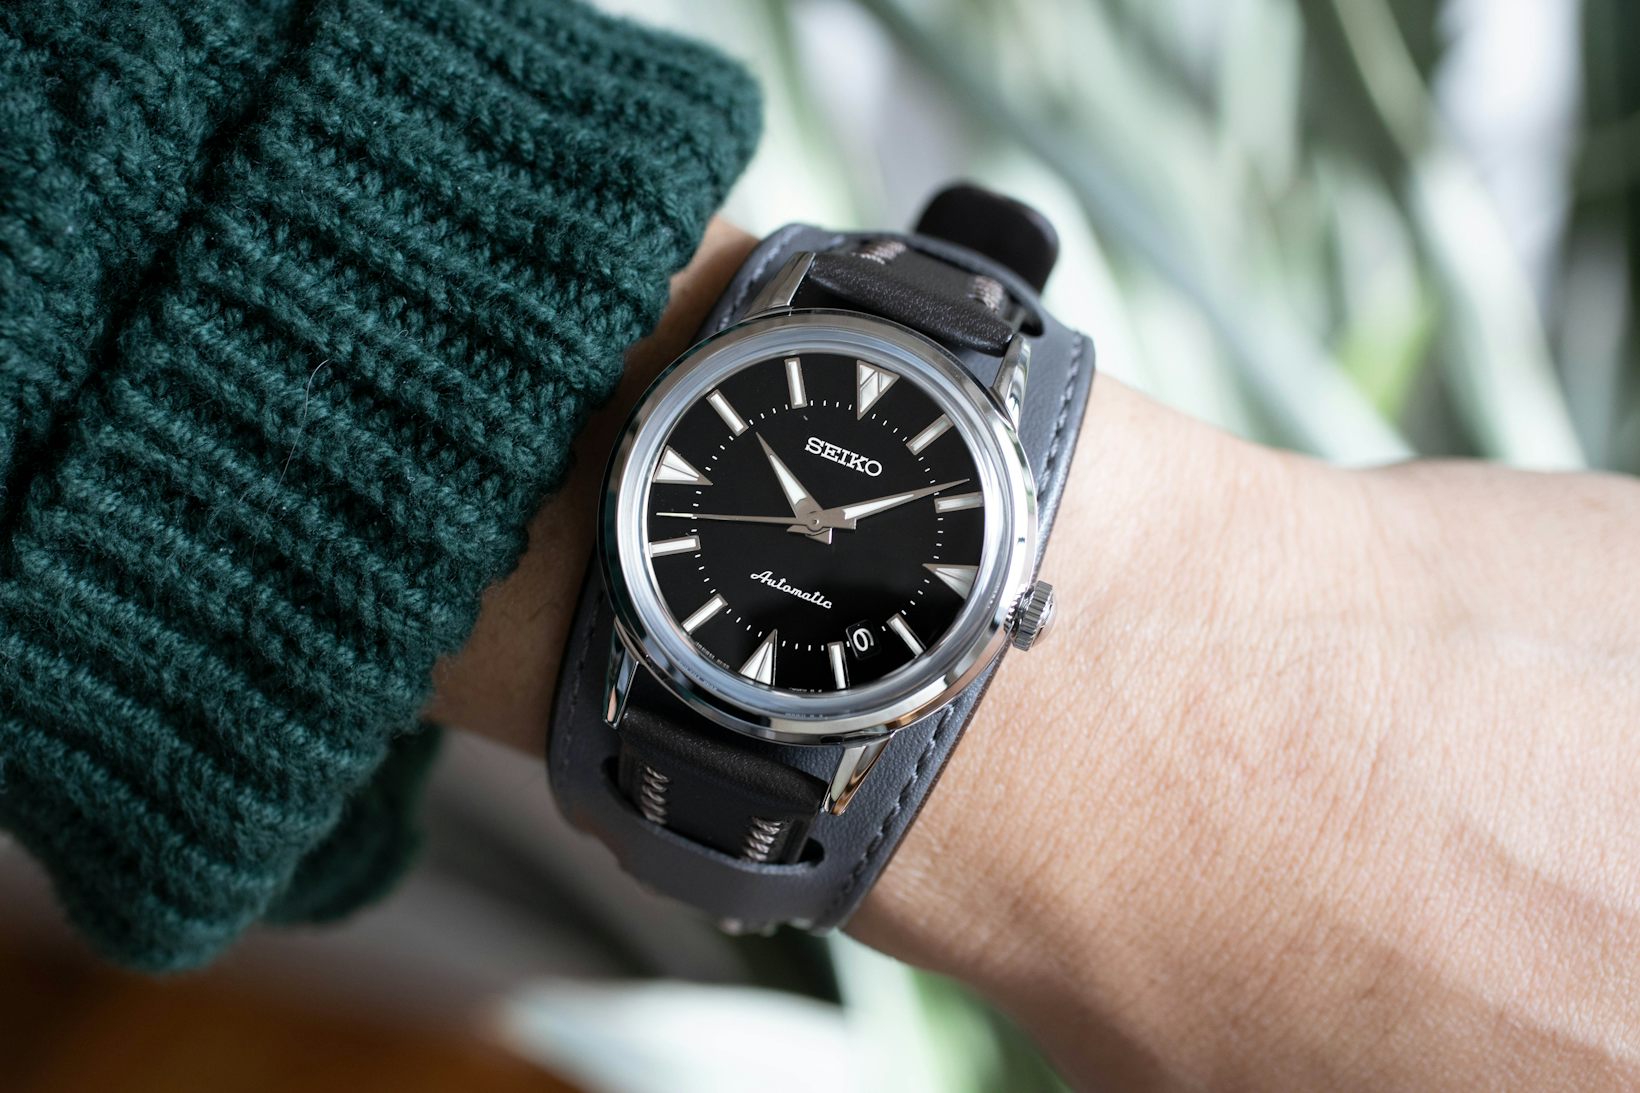 HODINKEE asks, are hard to pronounce brand names tough on sales?